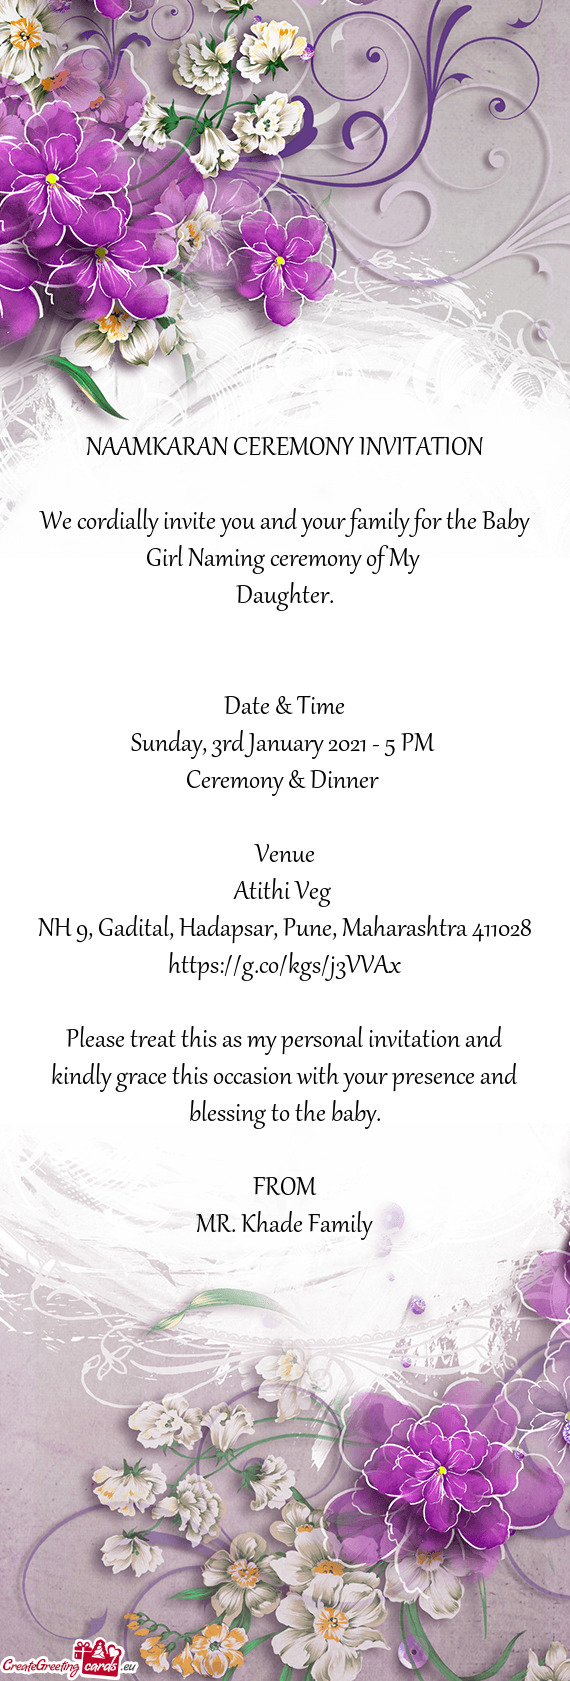 We cordially invite you and your family for the Baby Girl Naming ceremony of My